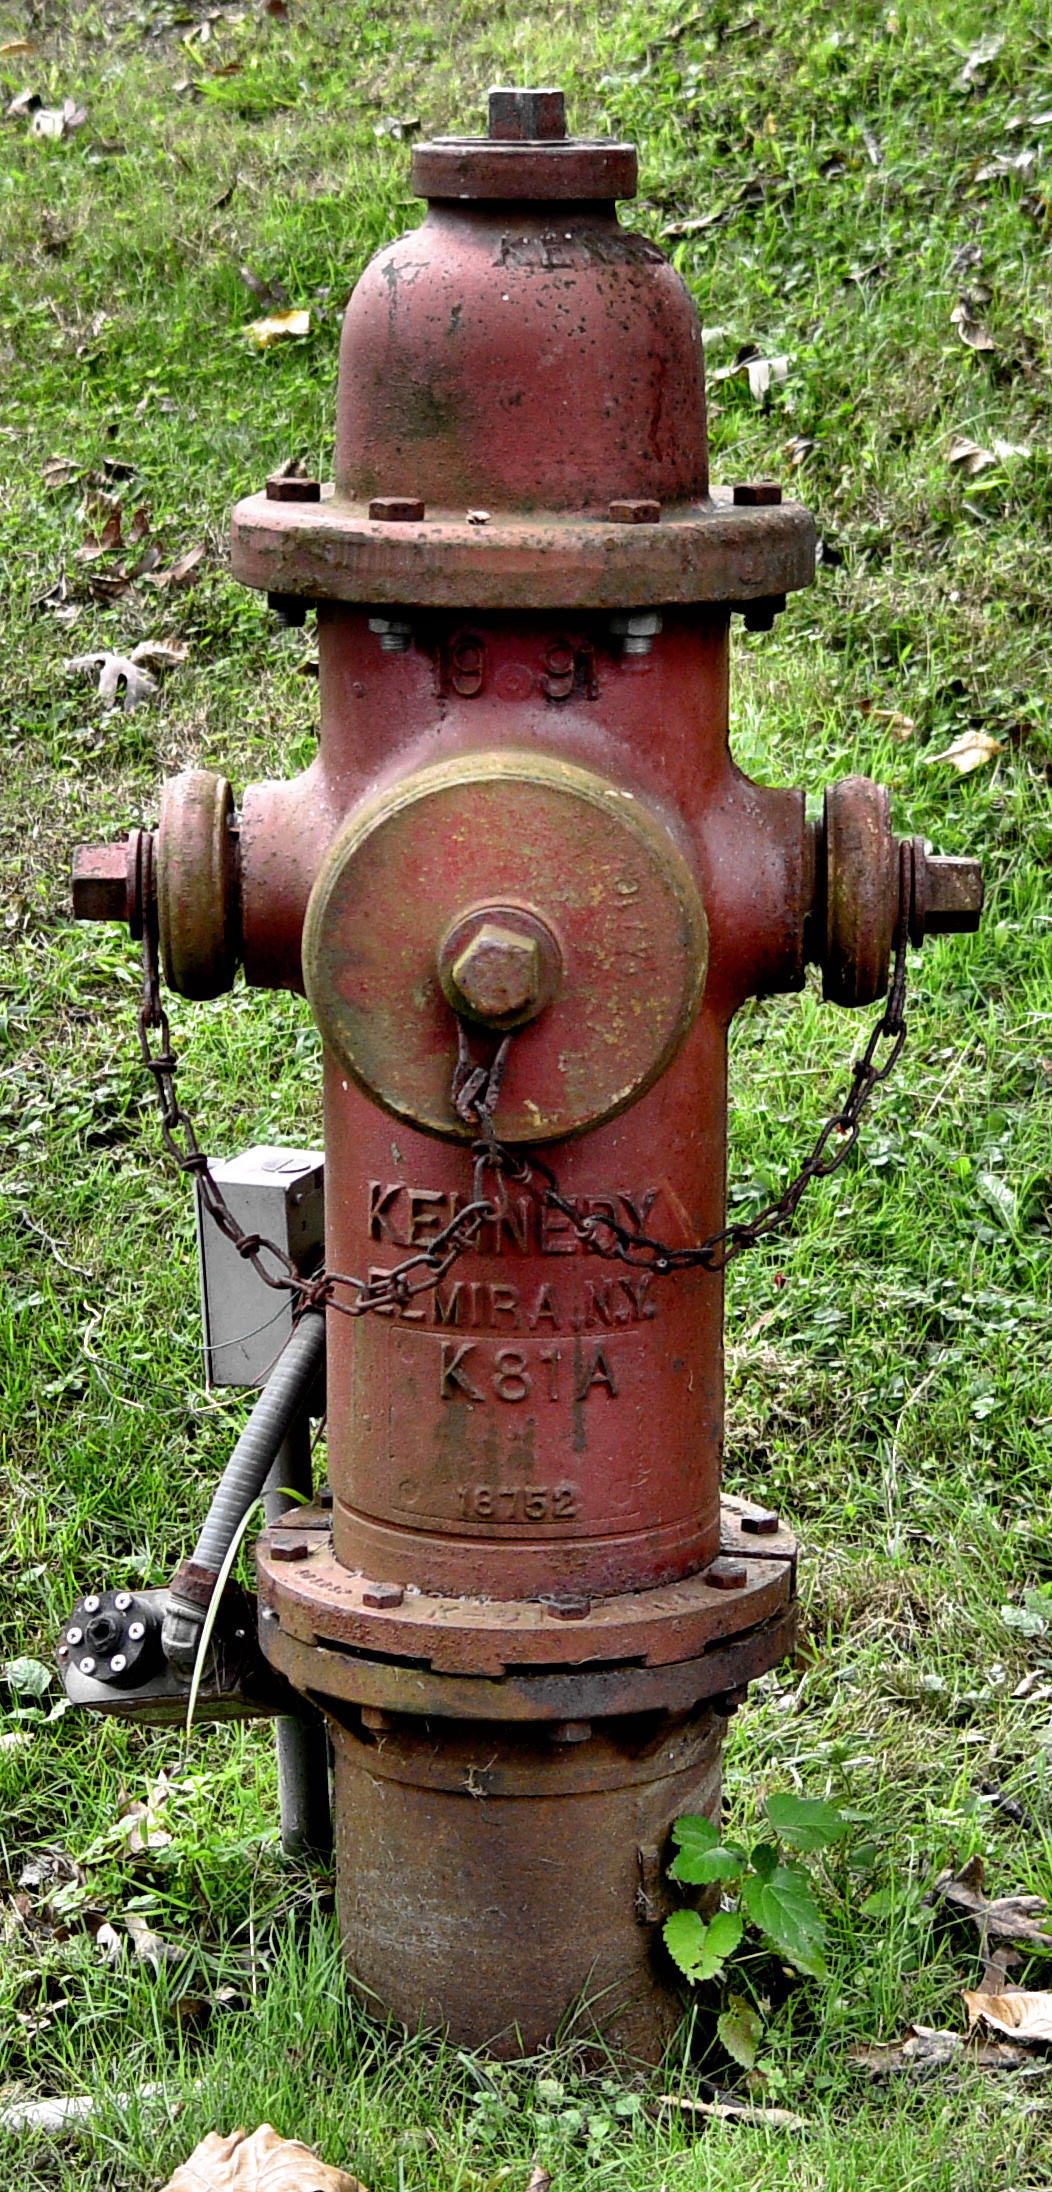 an old fire hydrant in a field of grass